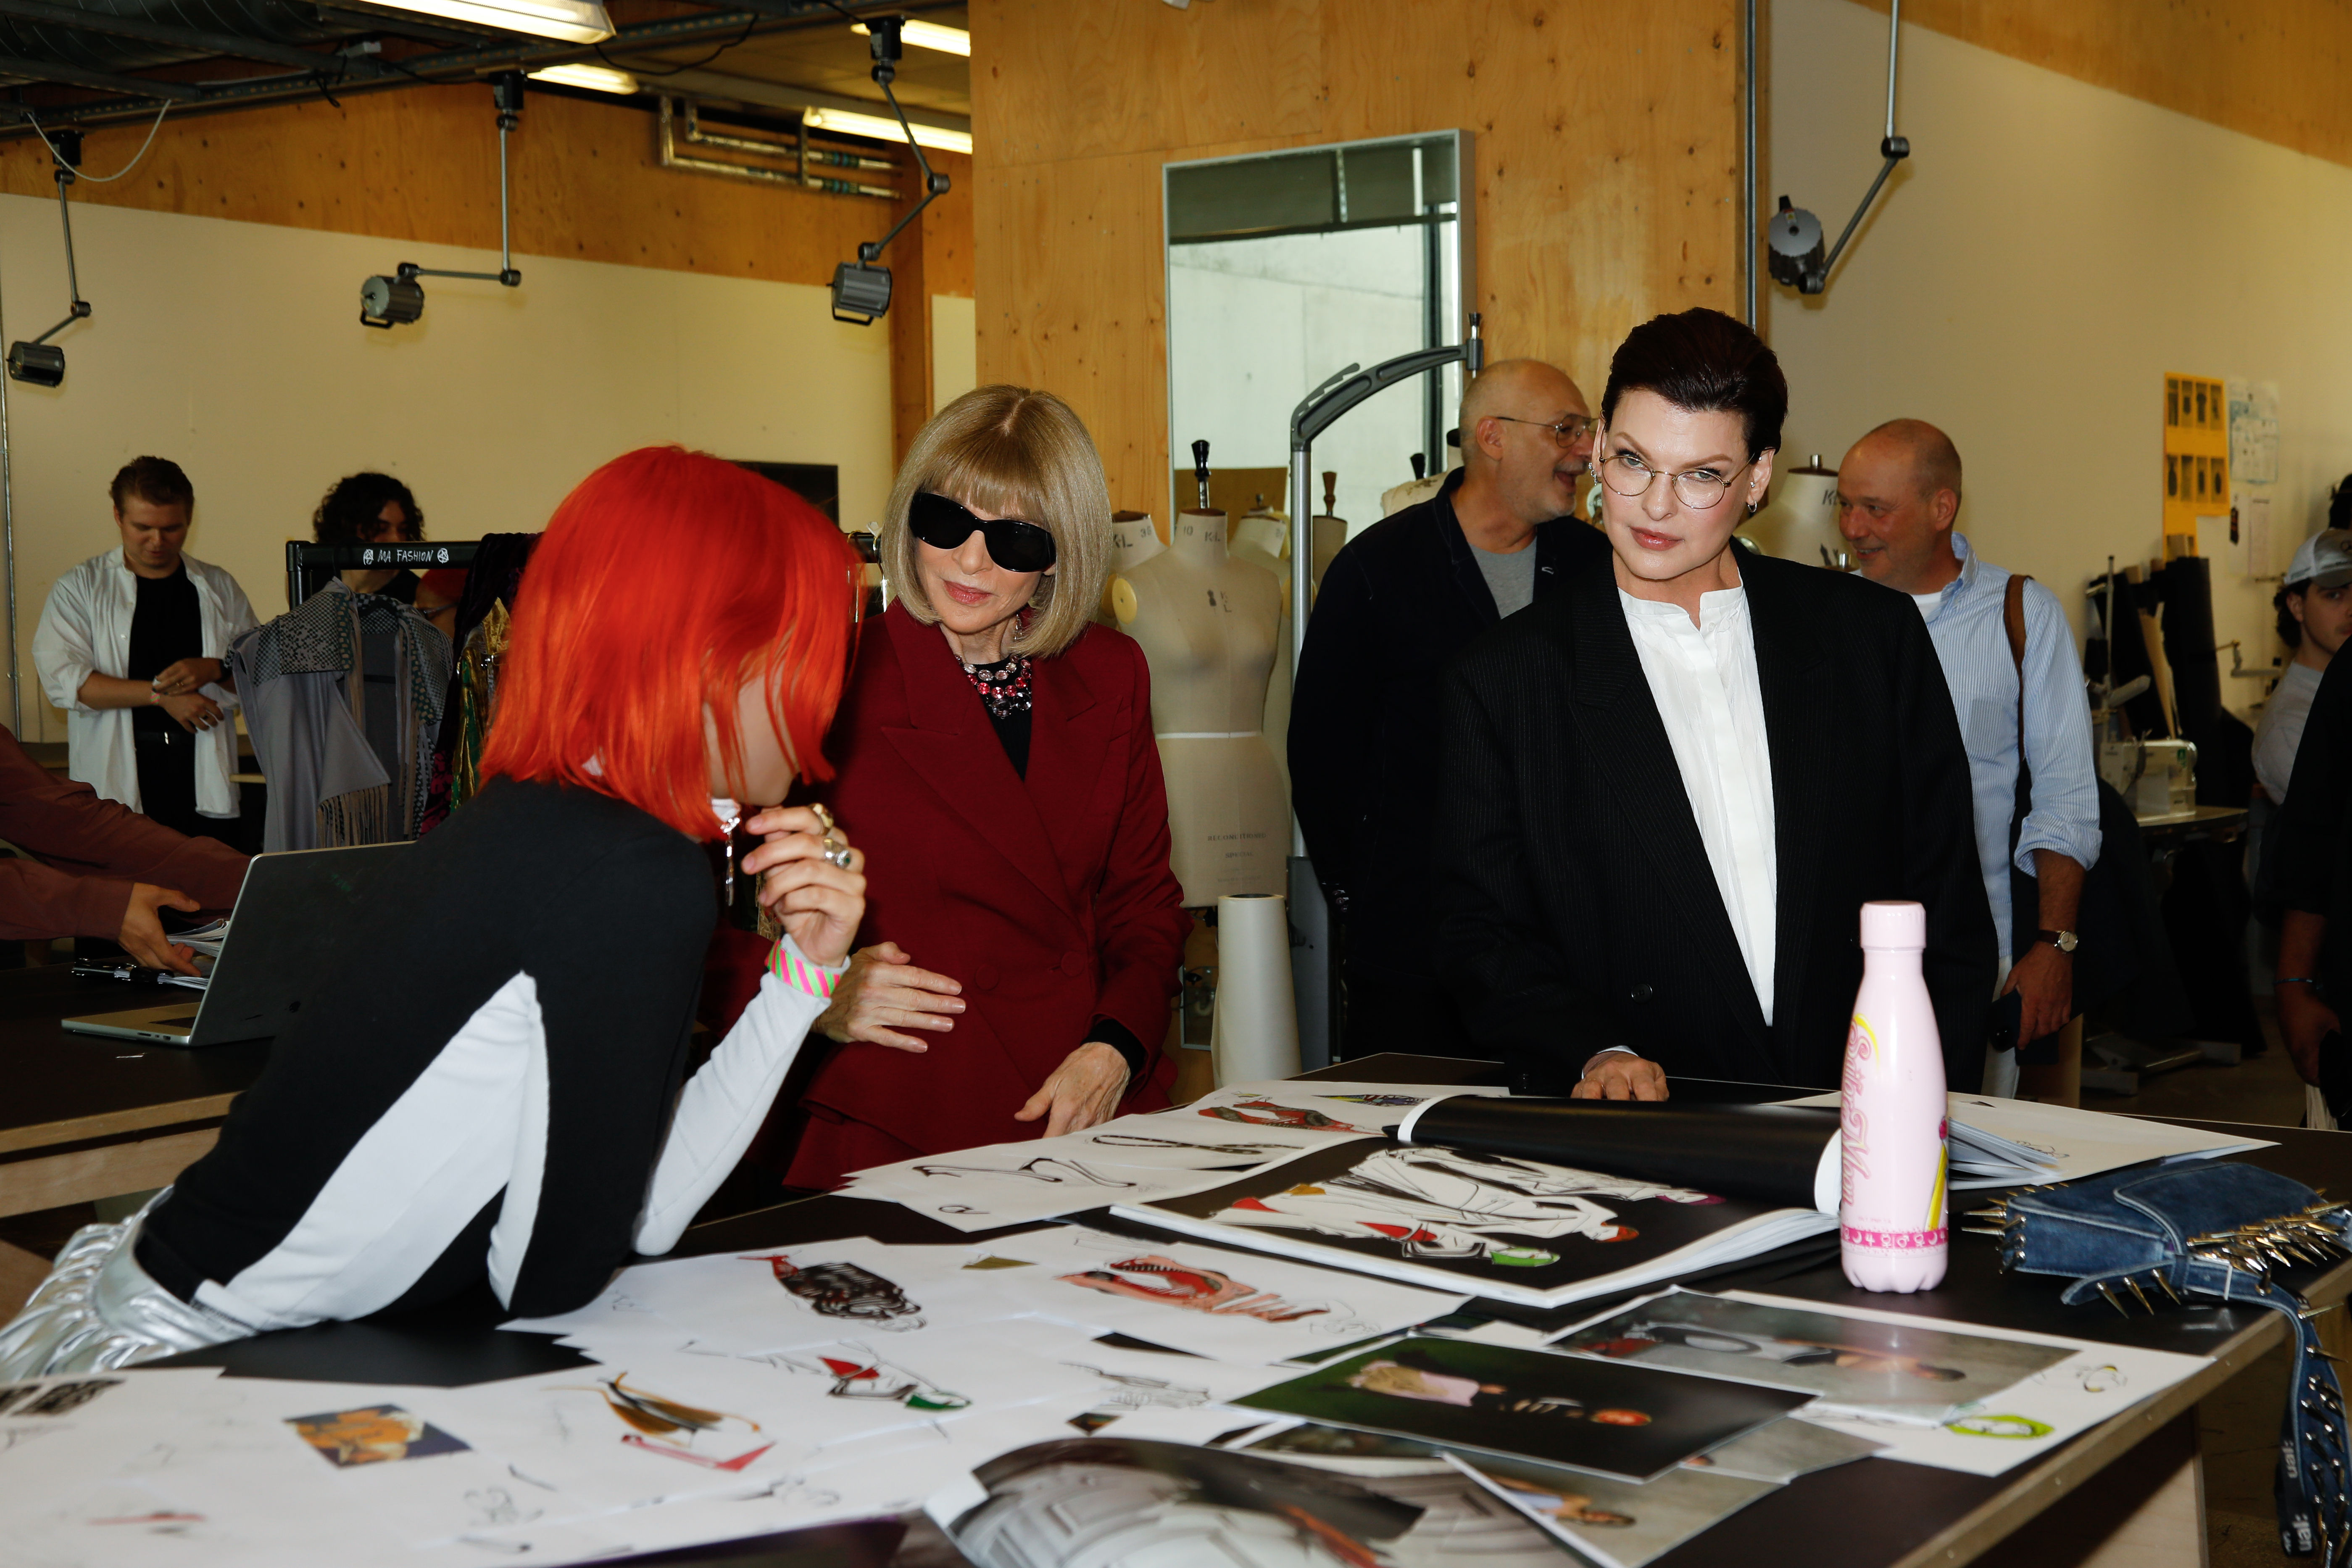 Linda and Anna meeting students in the Central Saint Martins Fashion studios, Sept 23